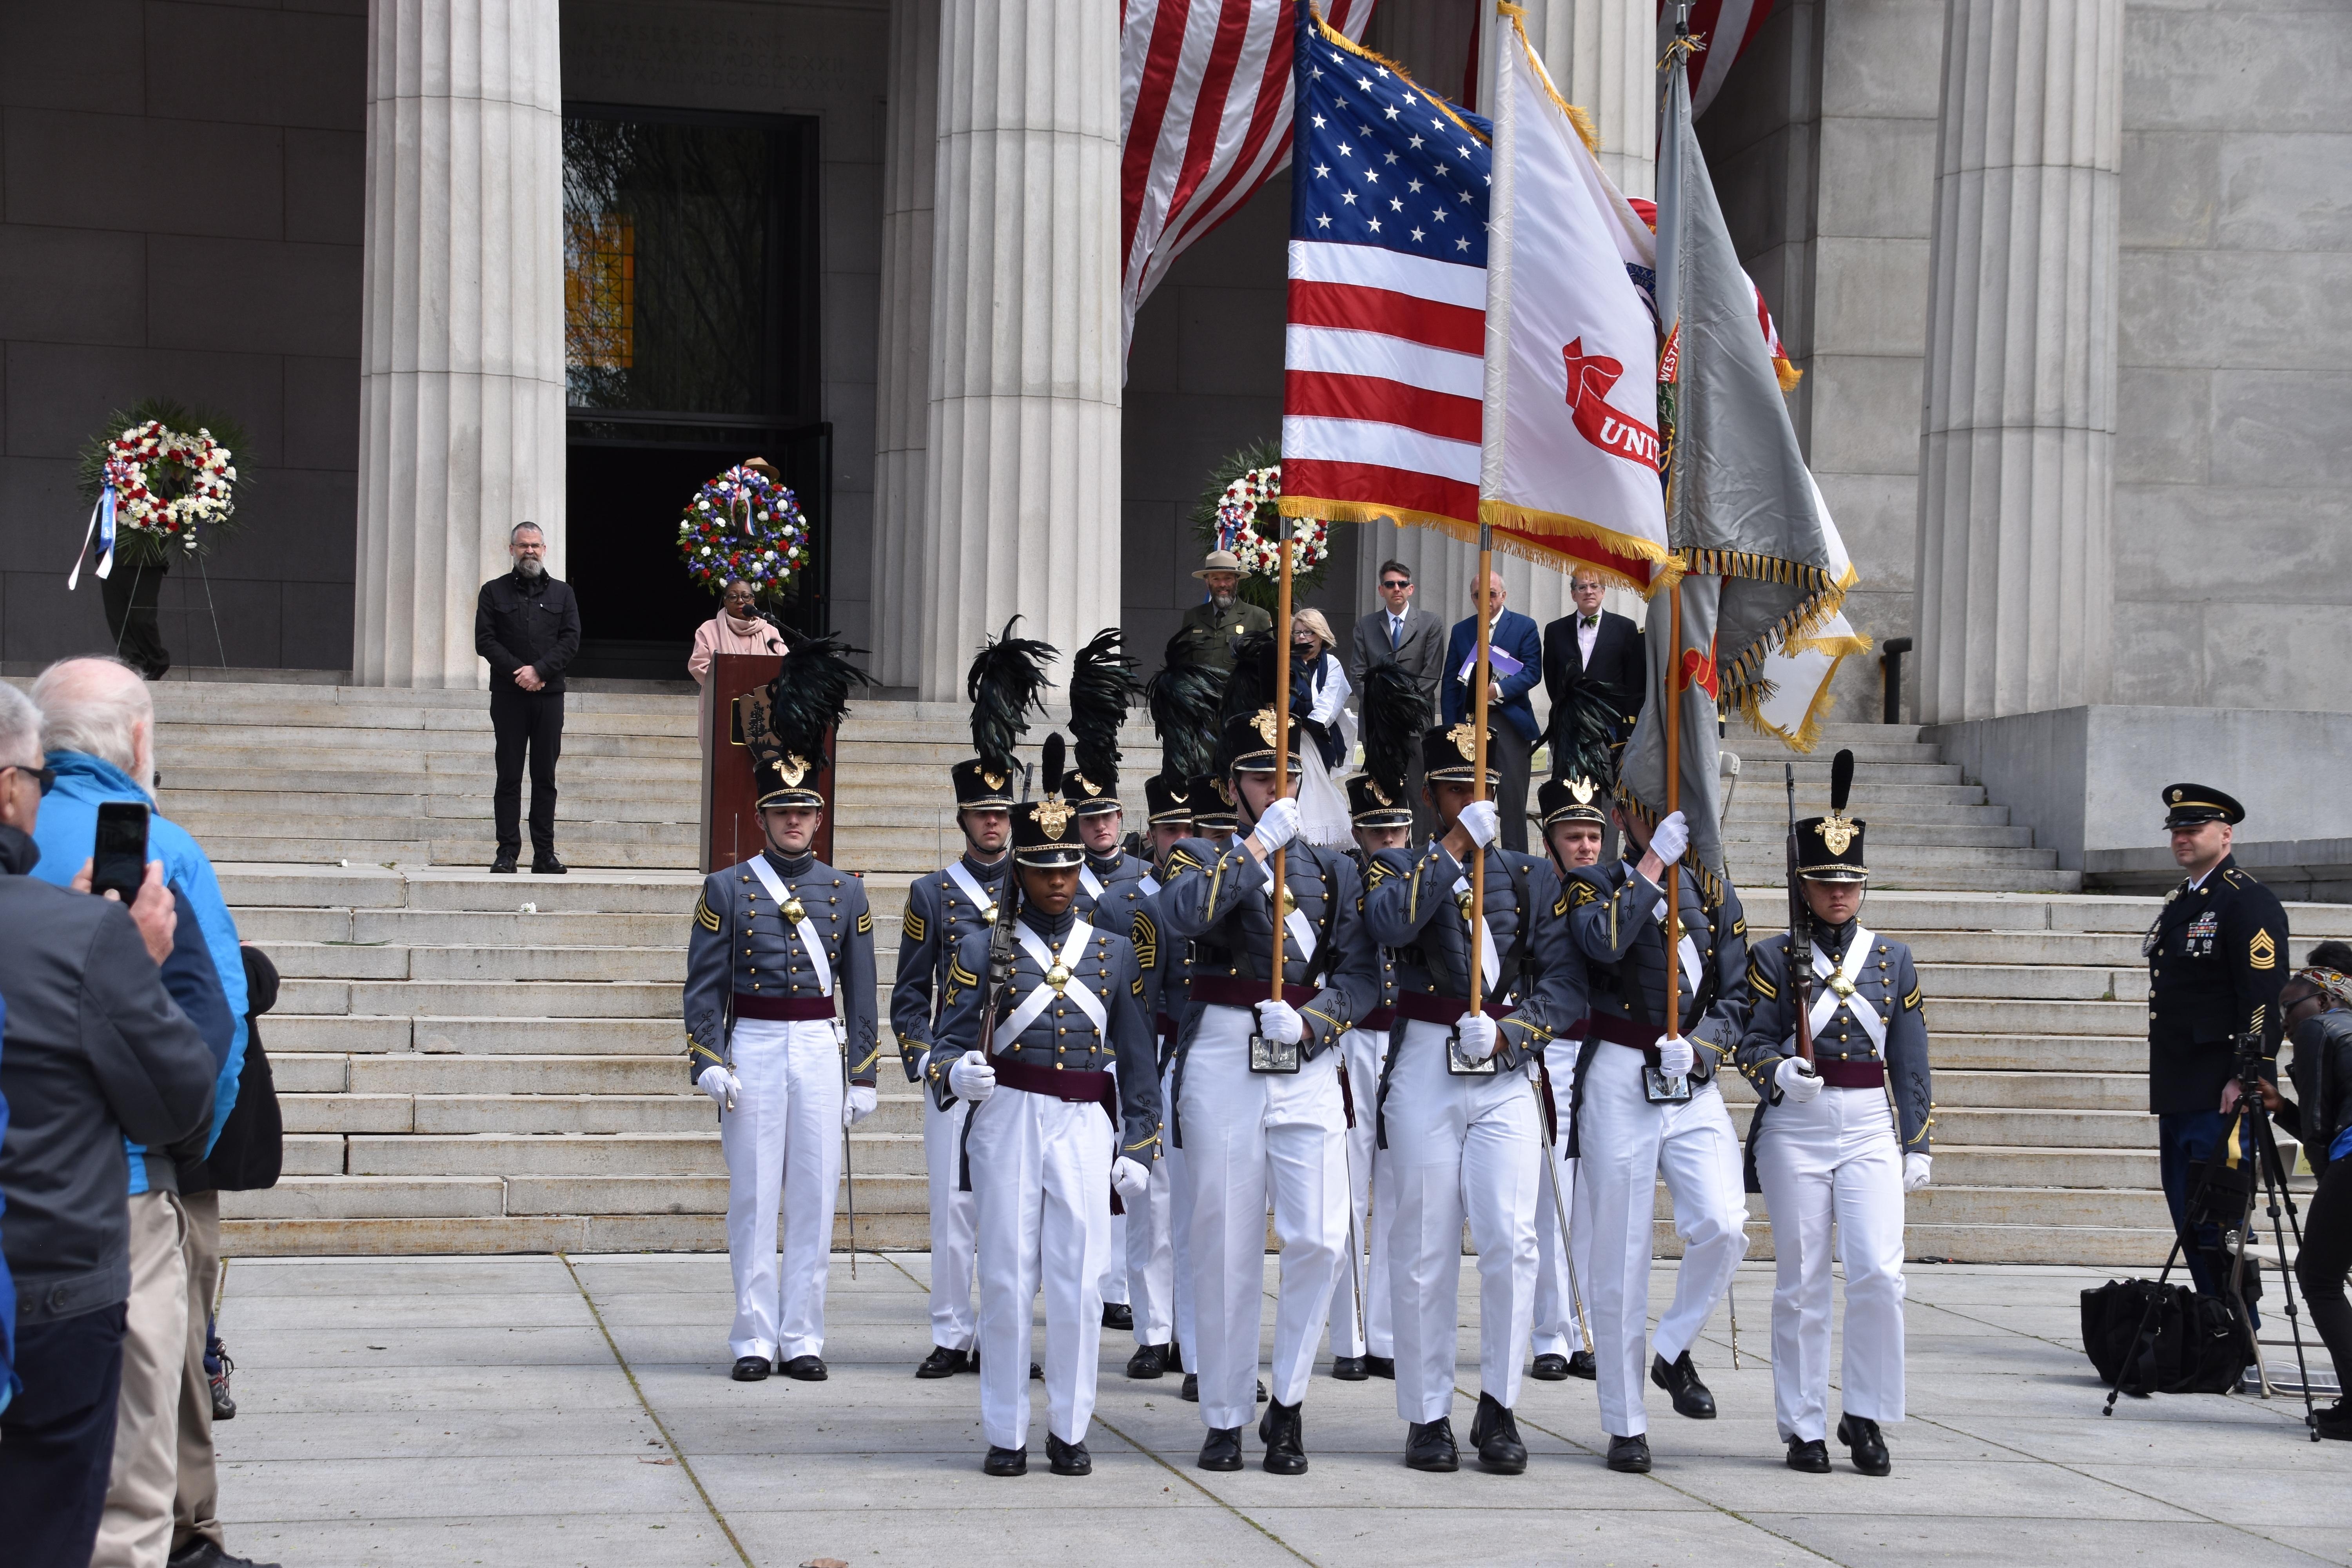 West Point Cadets in formal uniforms carrying three flags in front of the mausoleum